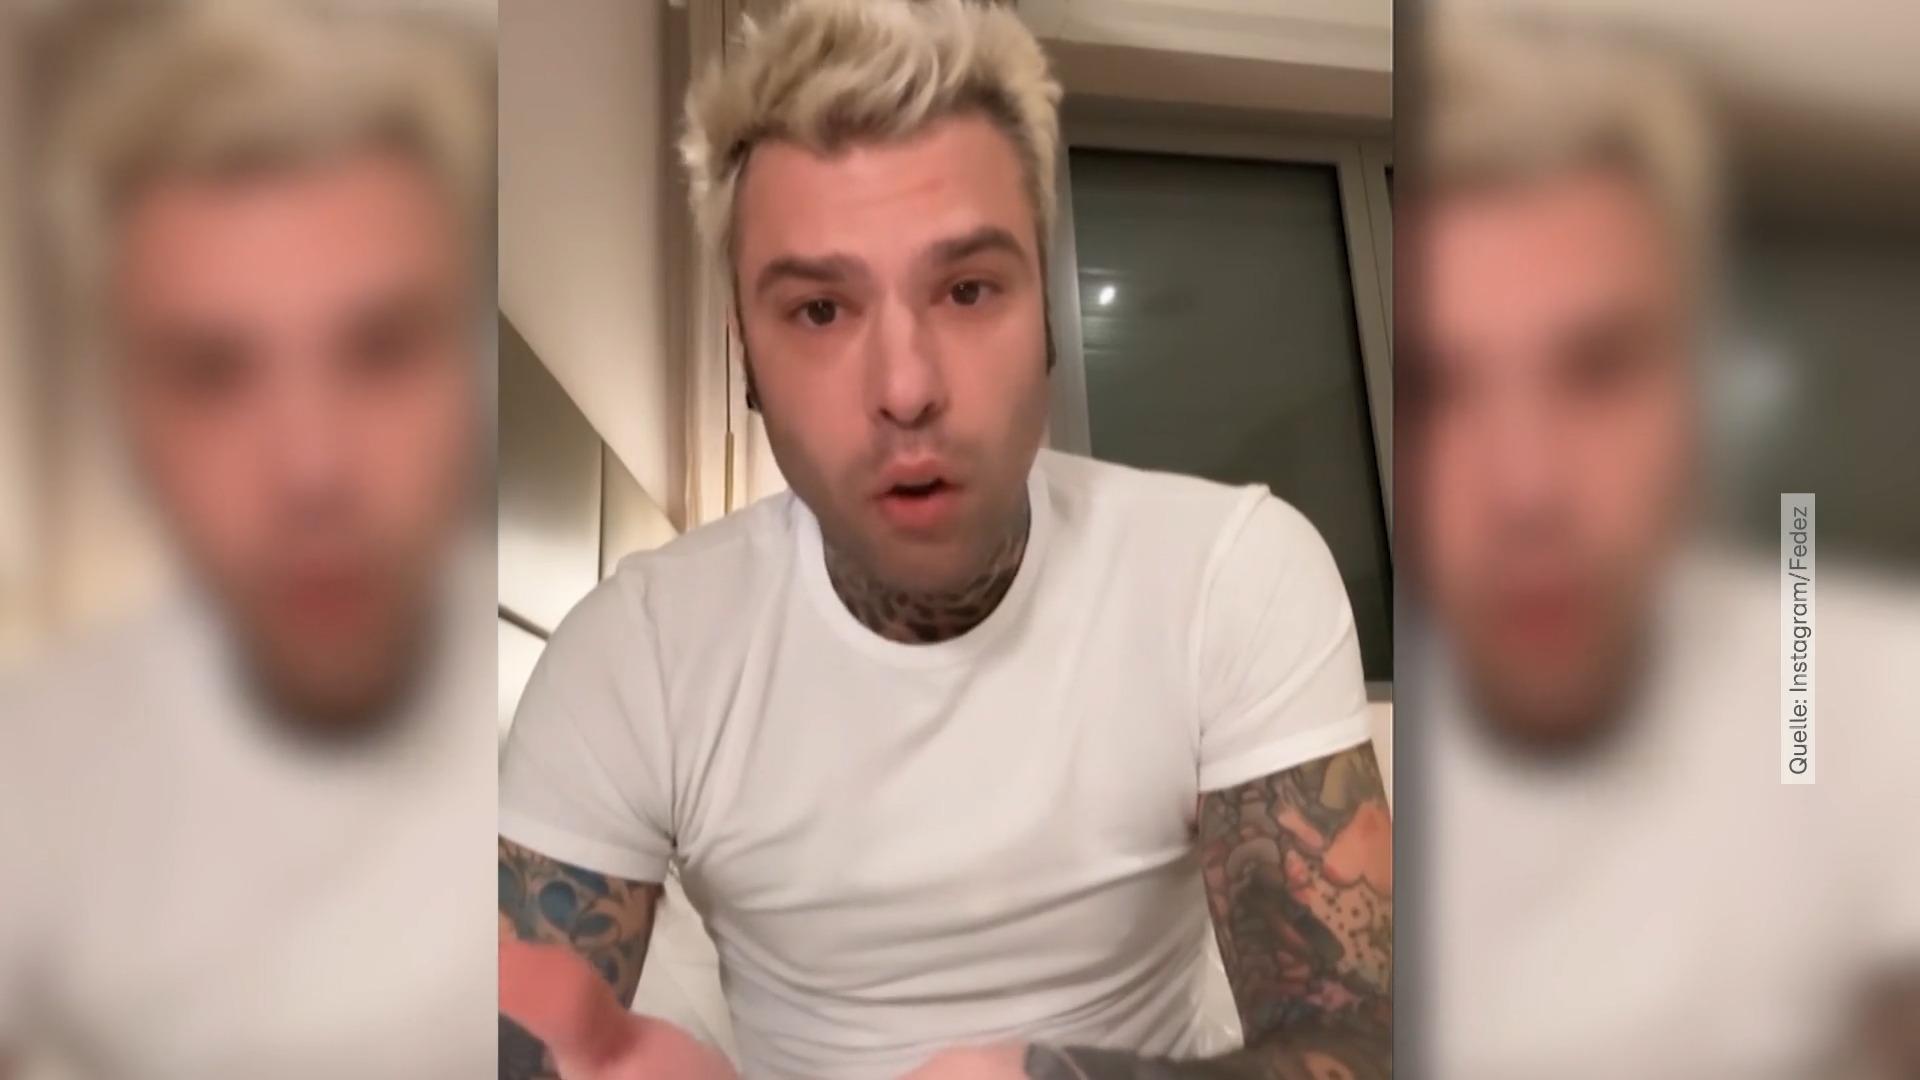 Chiara Ferragni's friend Fedez reports with tearful confession Because of a marriage crisis